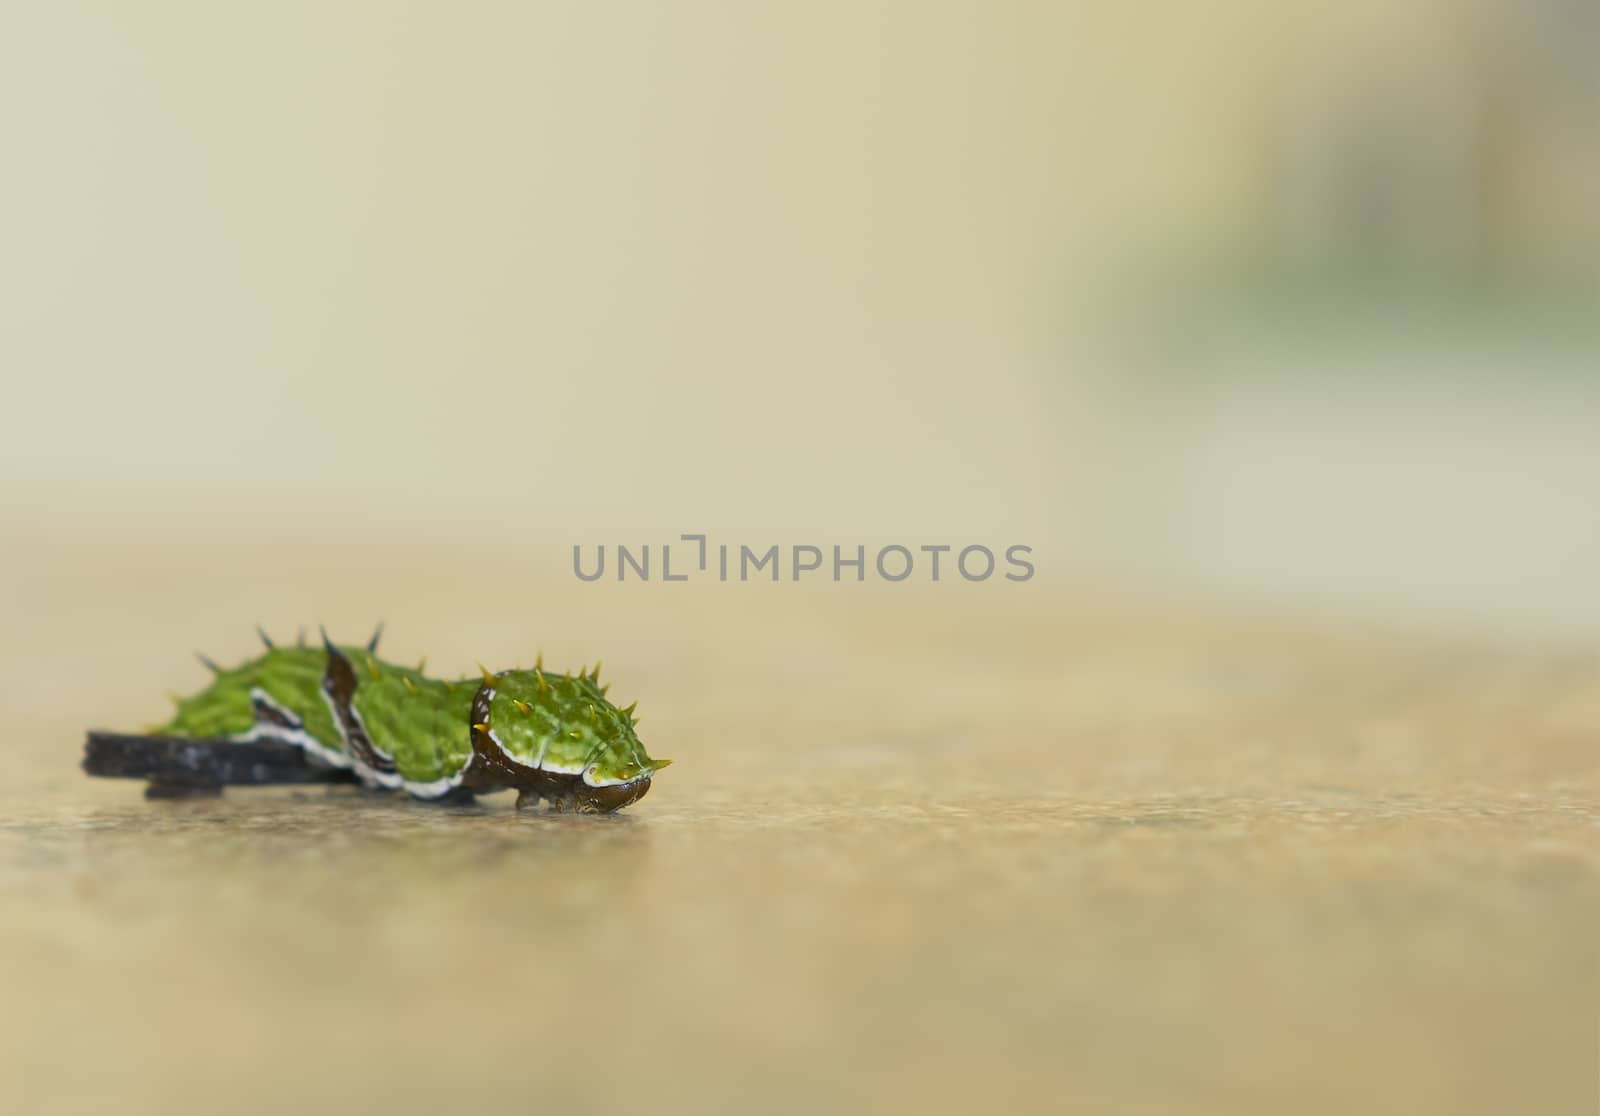 Green caterpillar larva of the orchard swallowtail butterfly, Papilio aegeus, crossing an obstacle with copy space